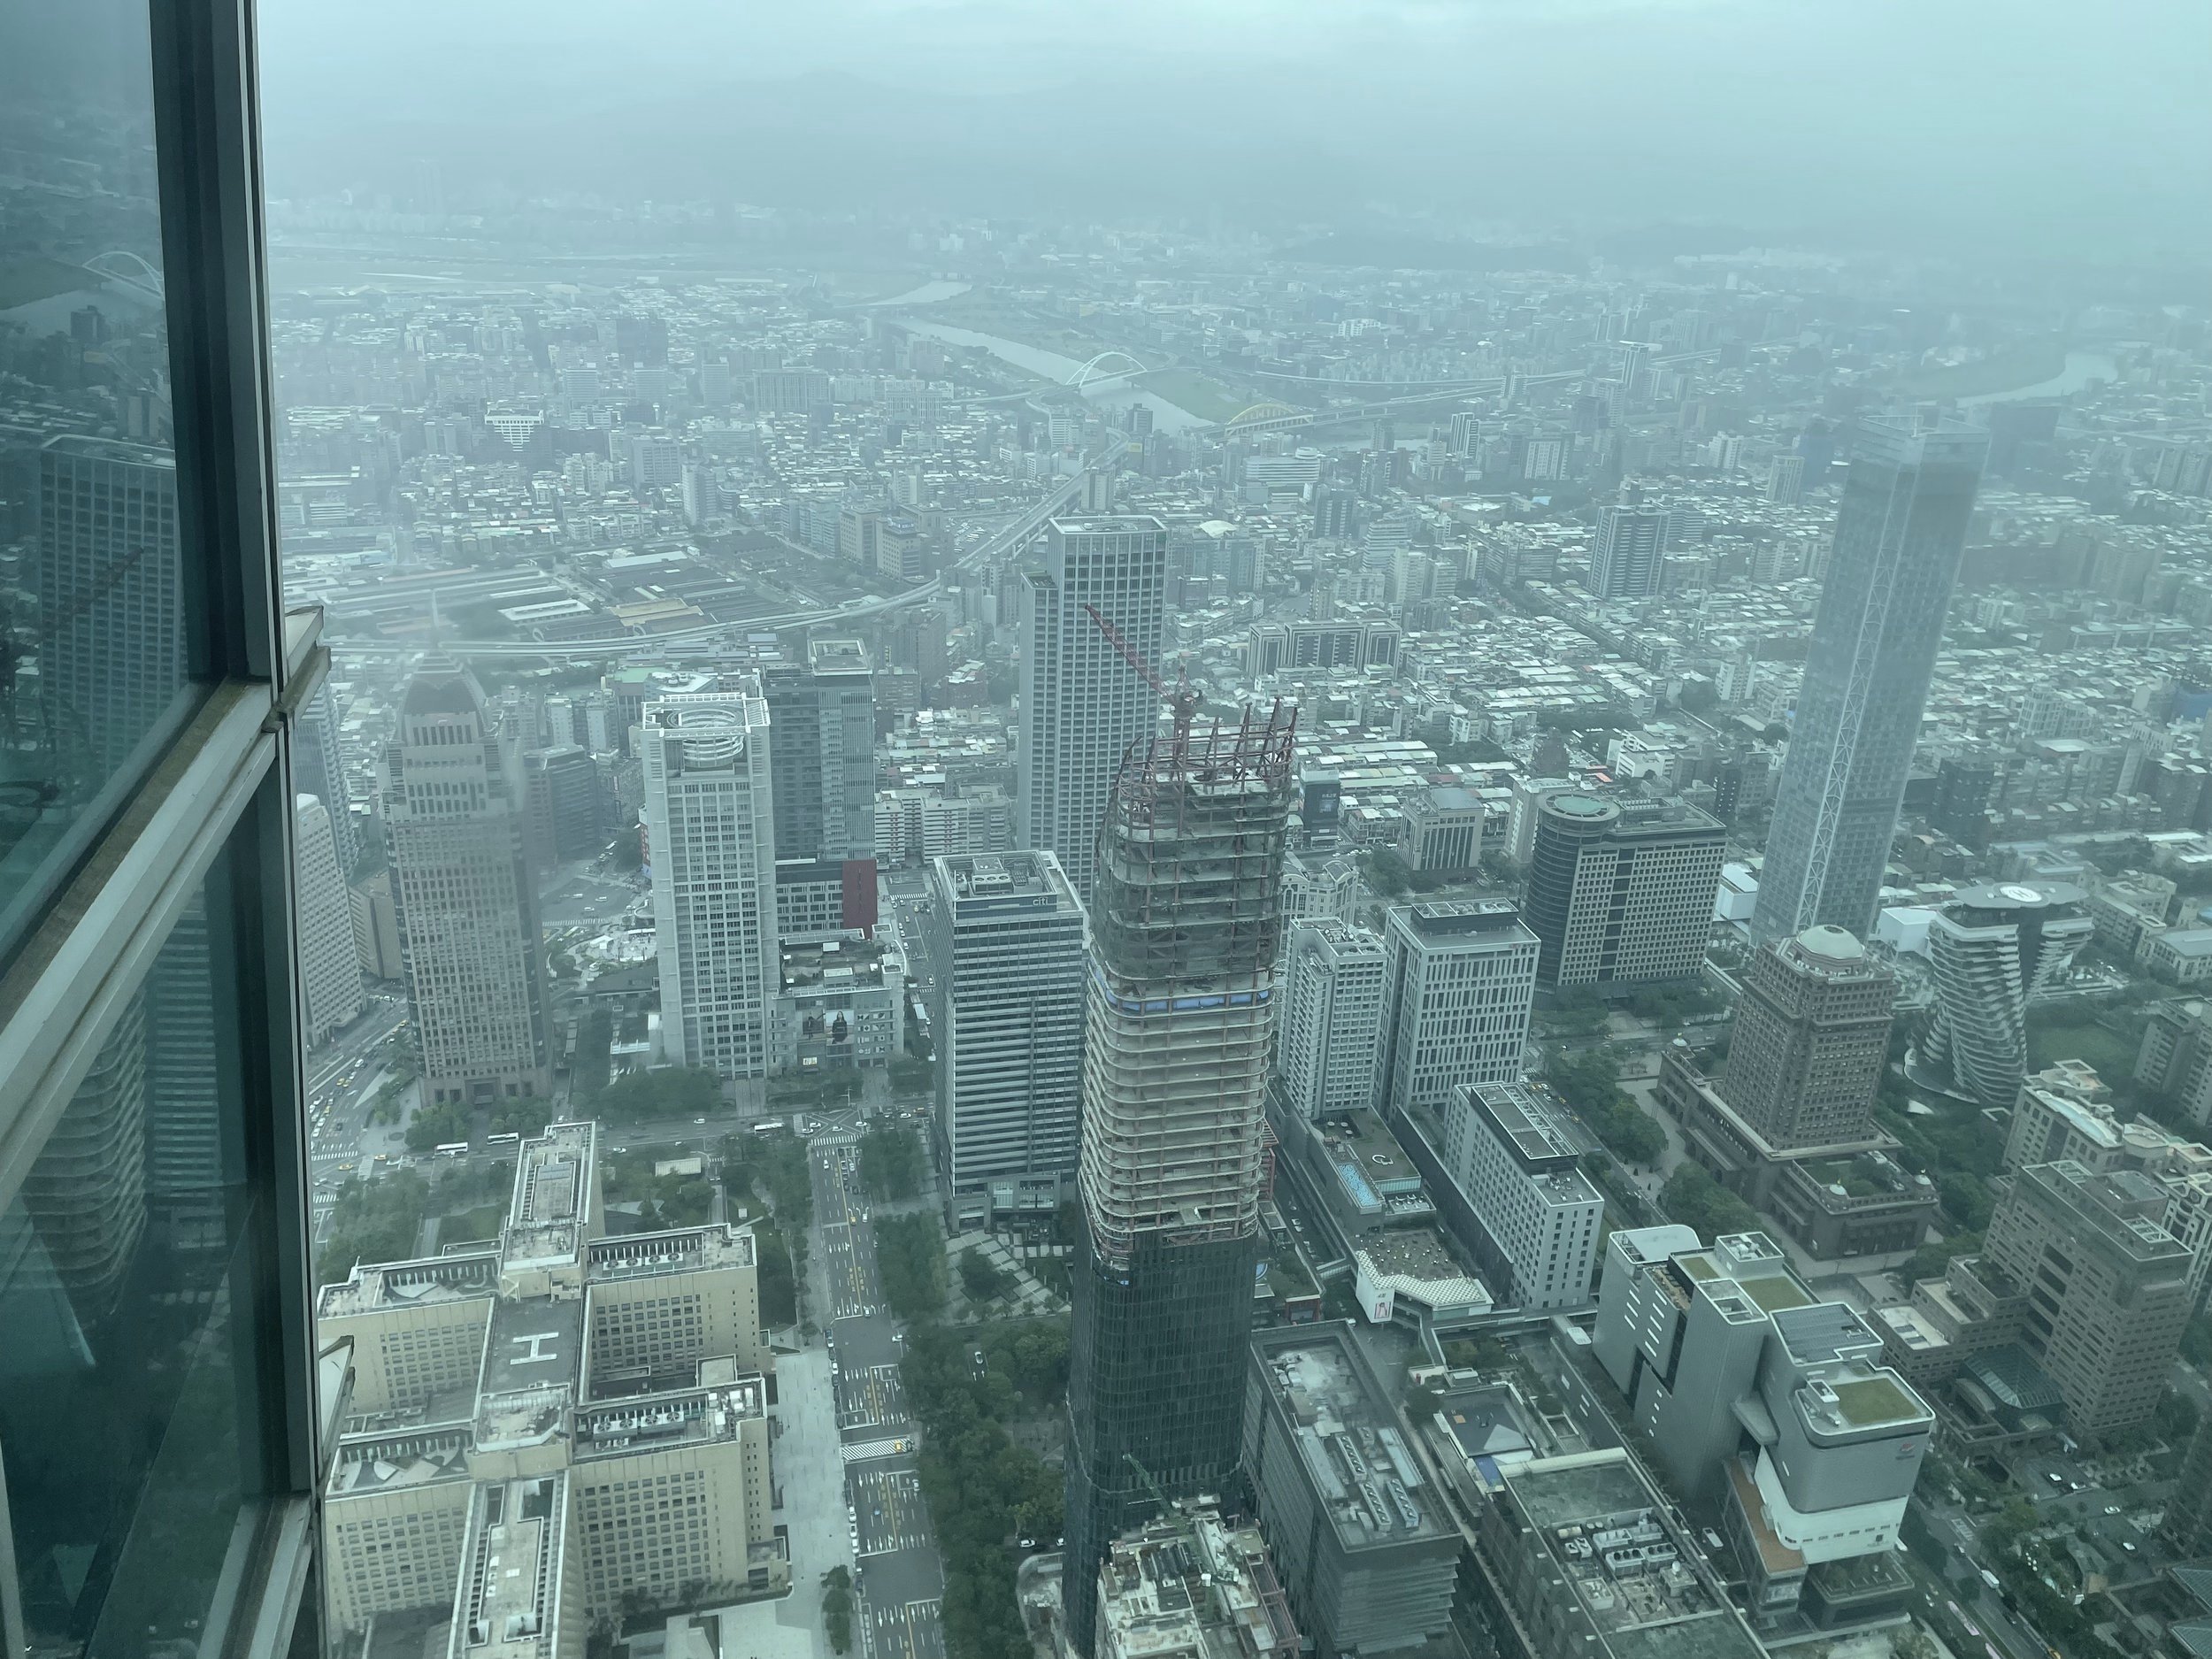 View from Taipei 101 looking Northeast